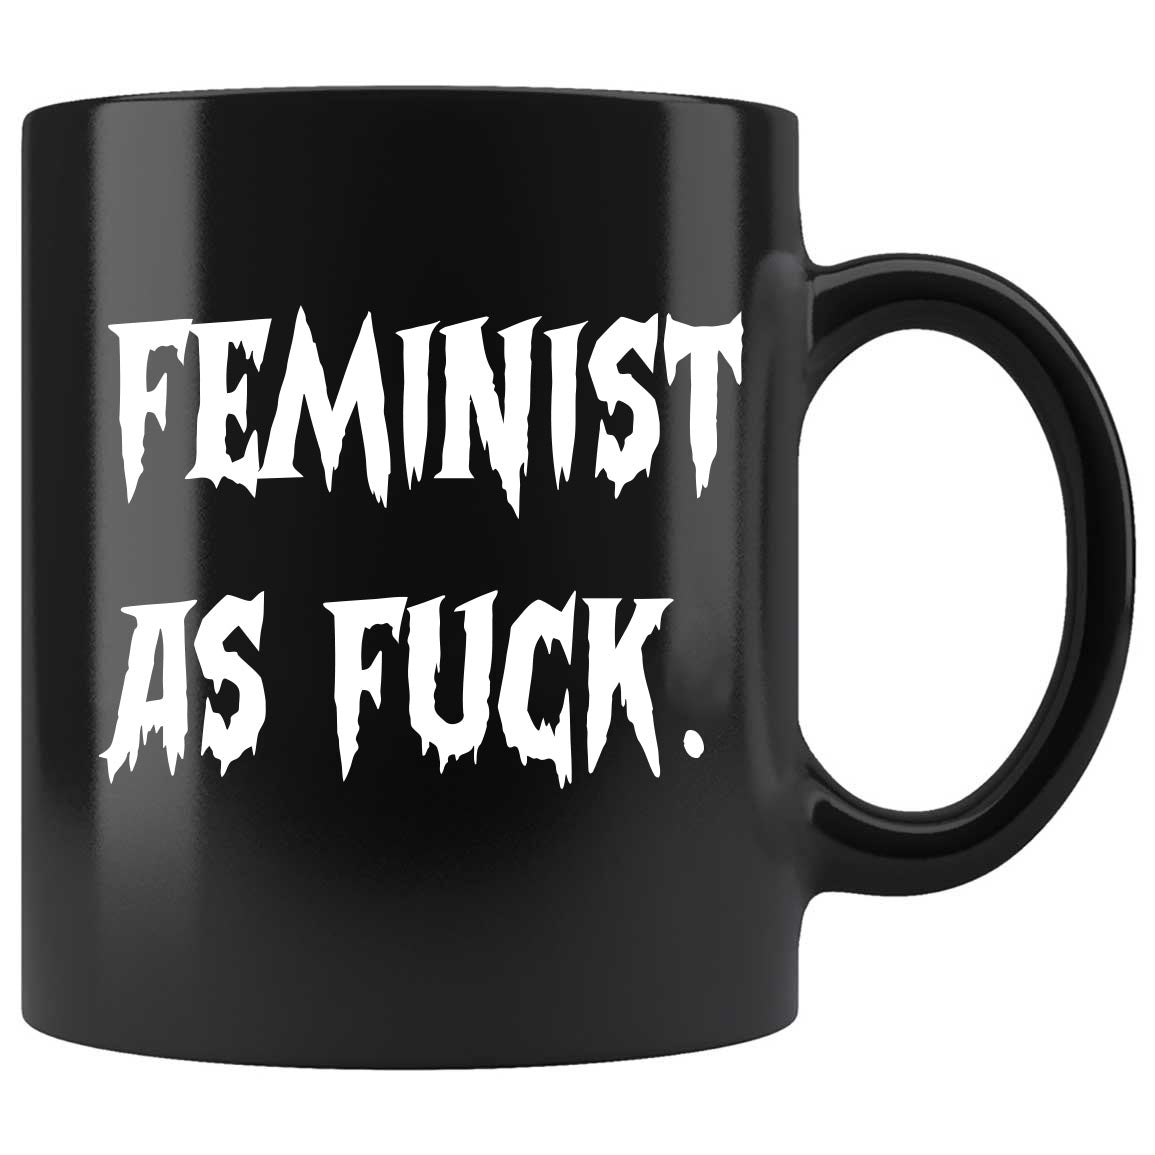 Skitongifts Funny Ceramic Coffee Mug For Birthday, Mother's Day, Father's Day, Christmas PN161221_Feminist